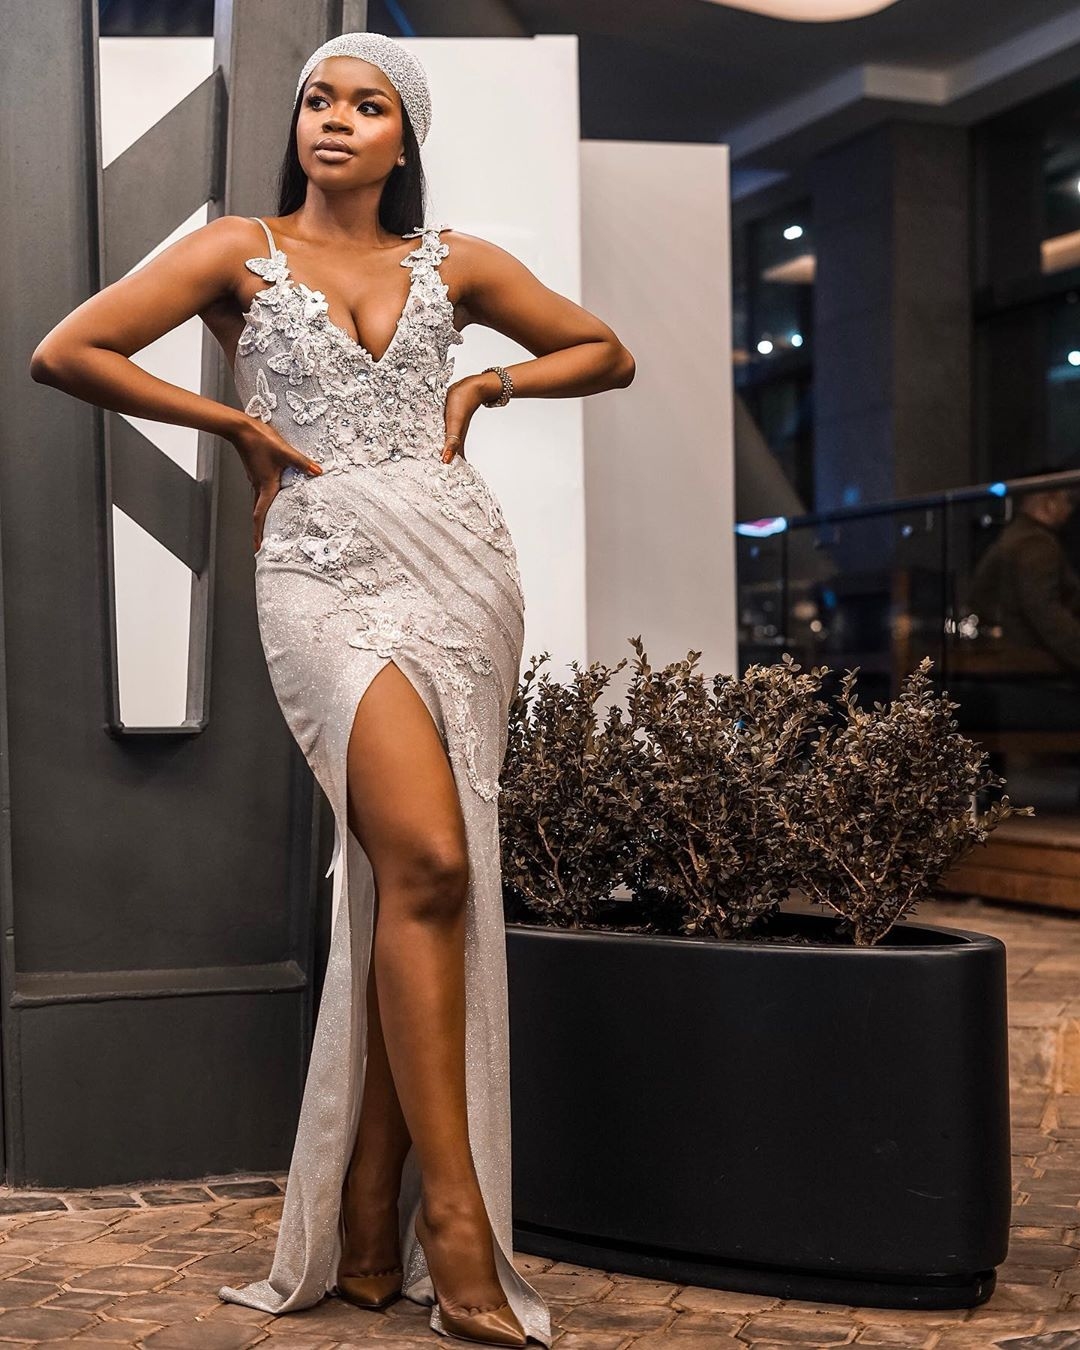 miss-south-africa-2019-celebrities-fashion-style-rave